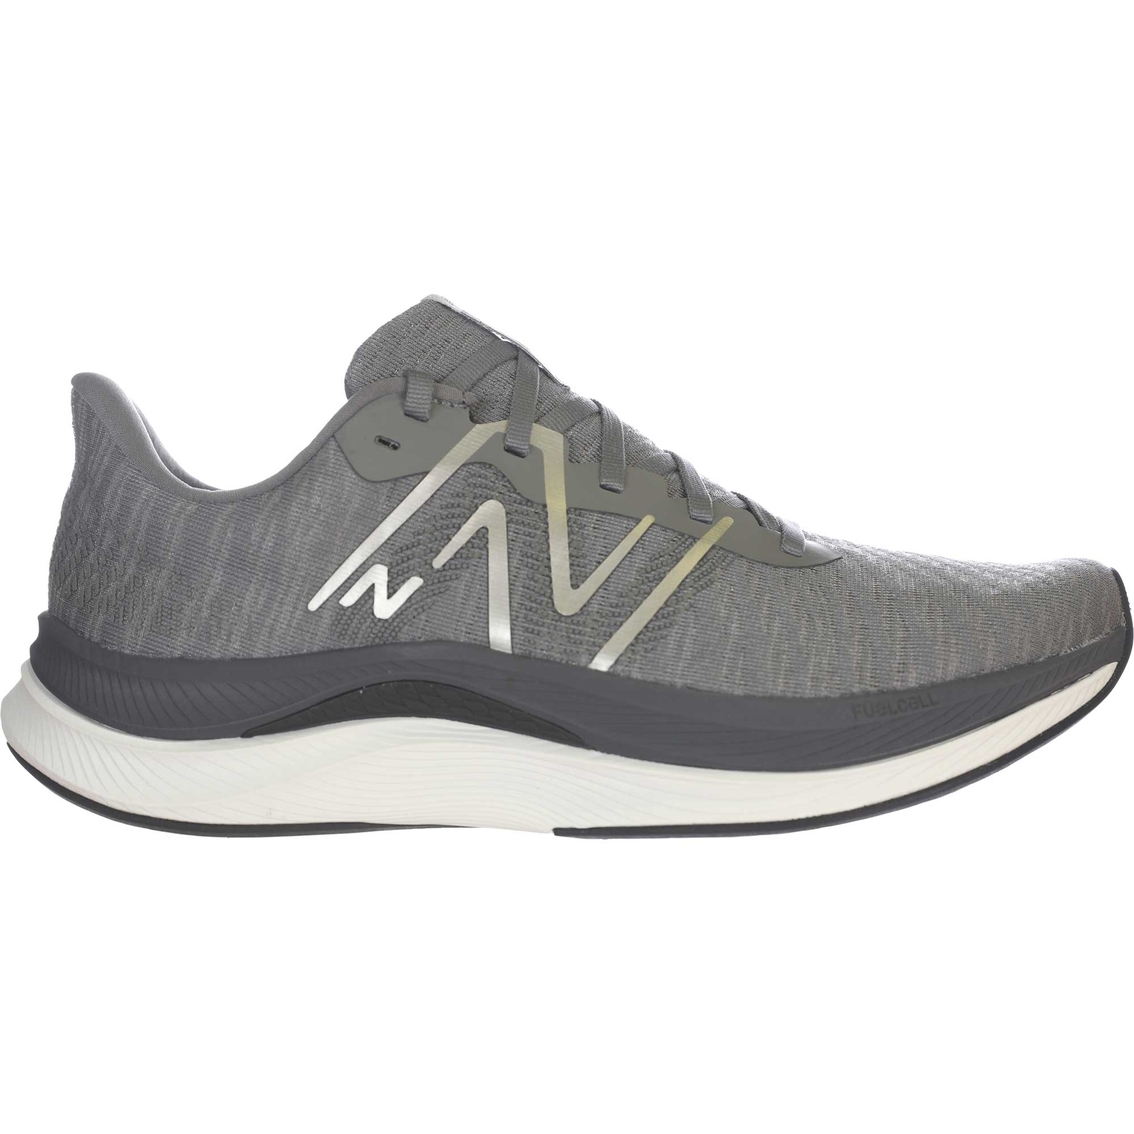 New Balance Men's FuelCell Propel v4 Running Shoes - Image 2 of 4